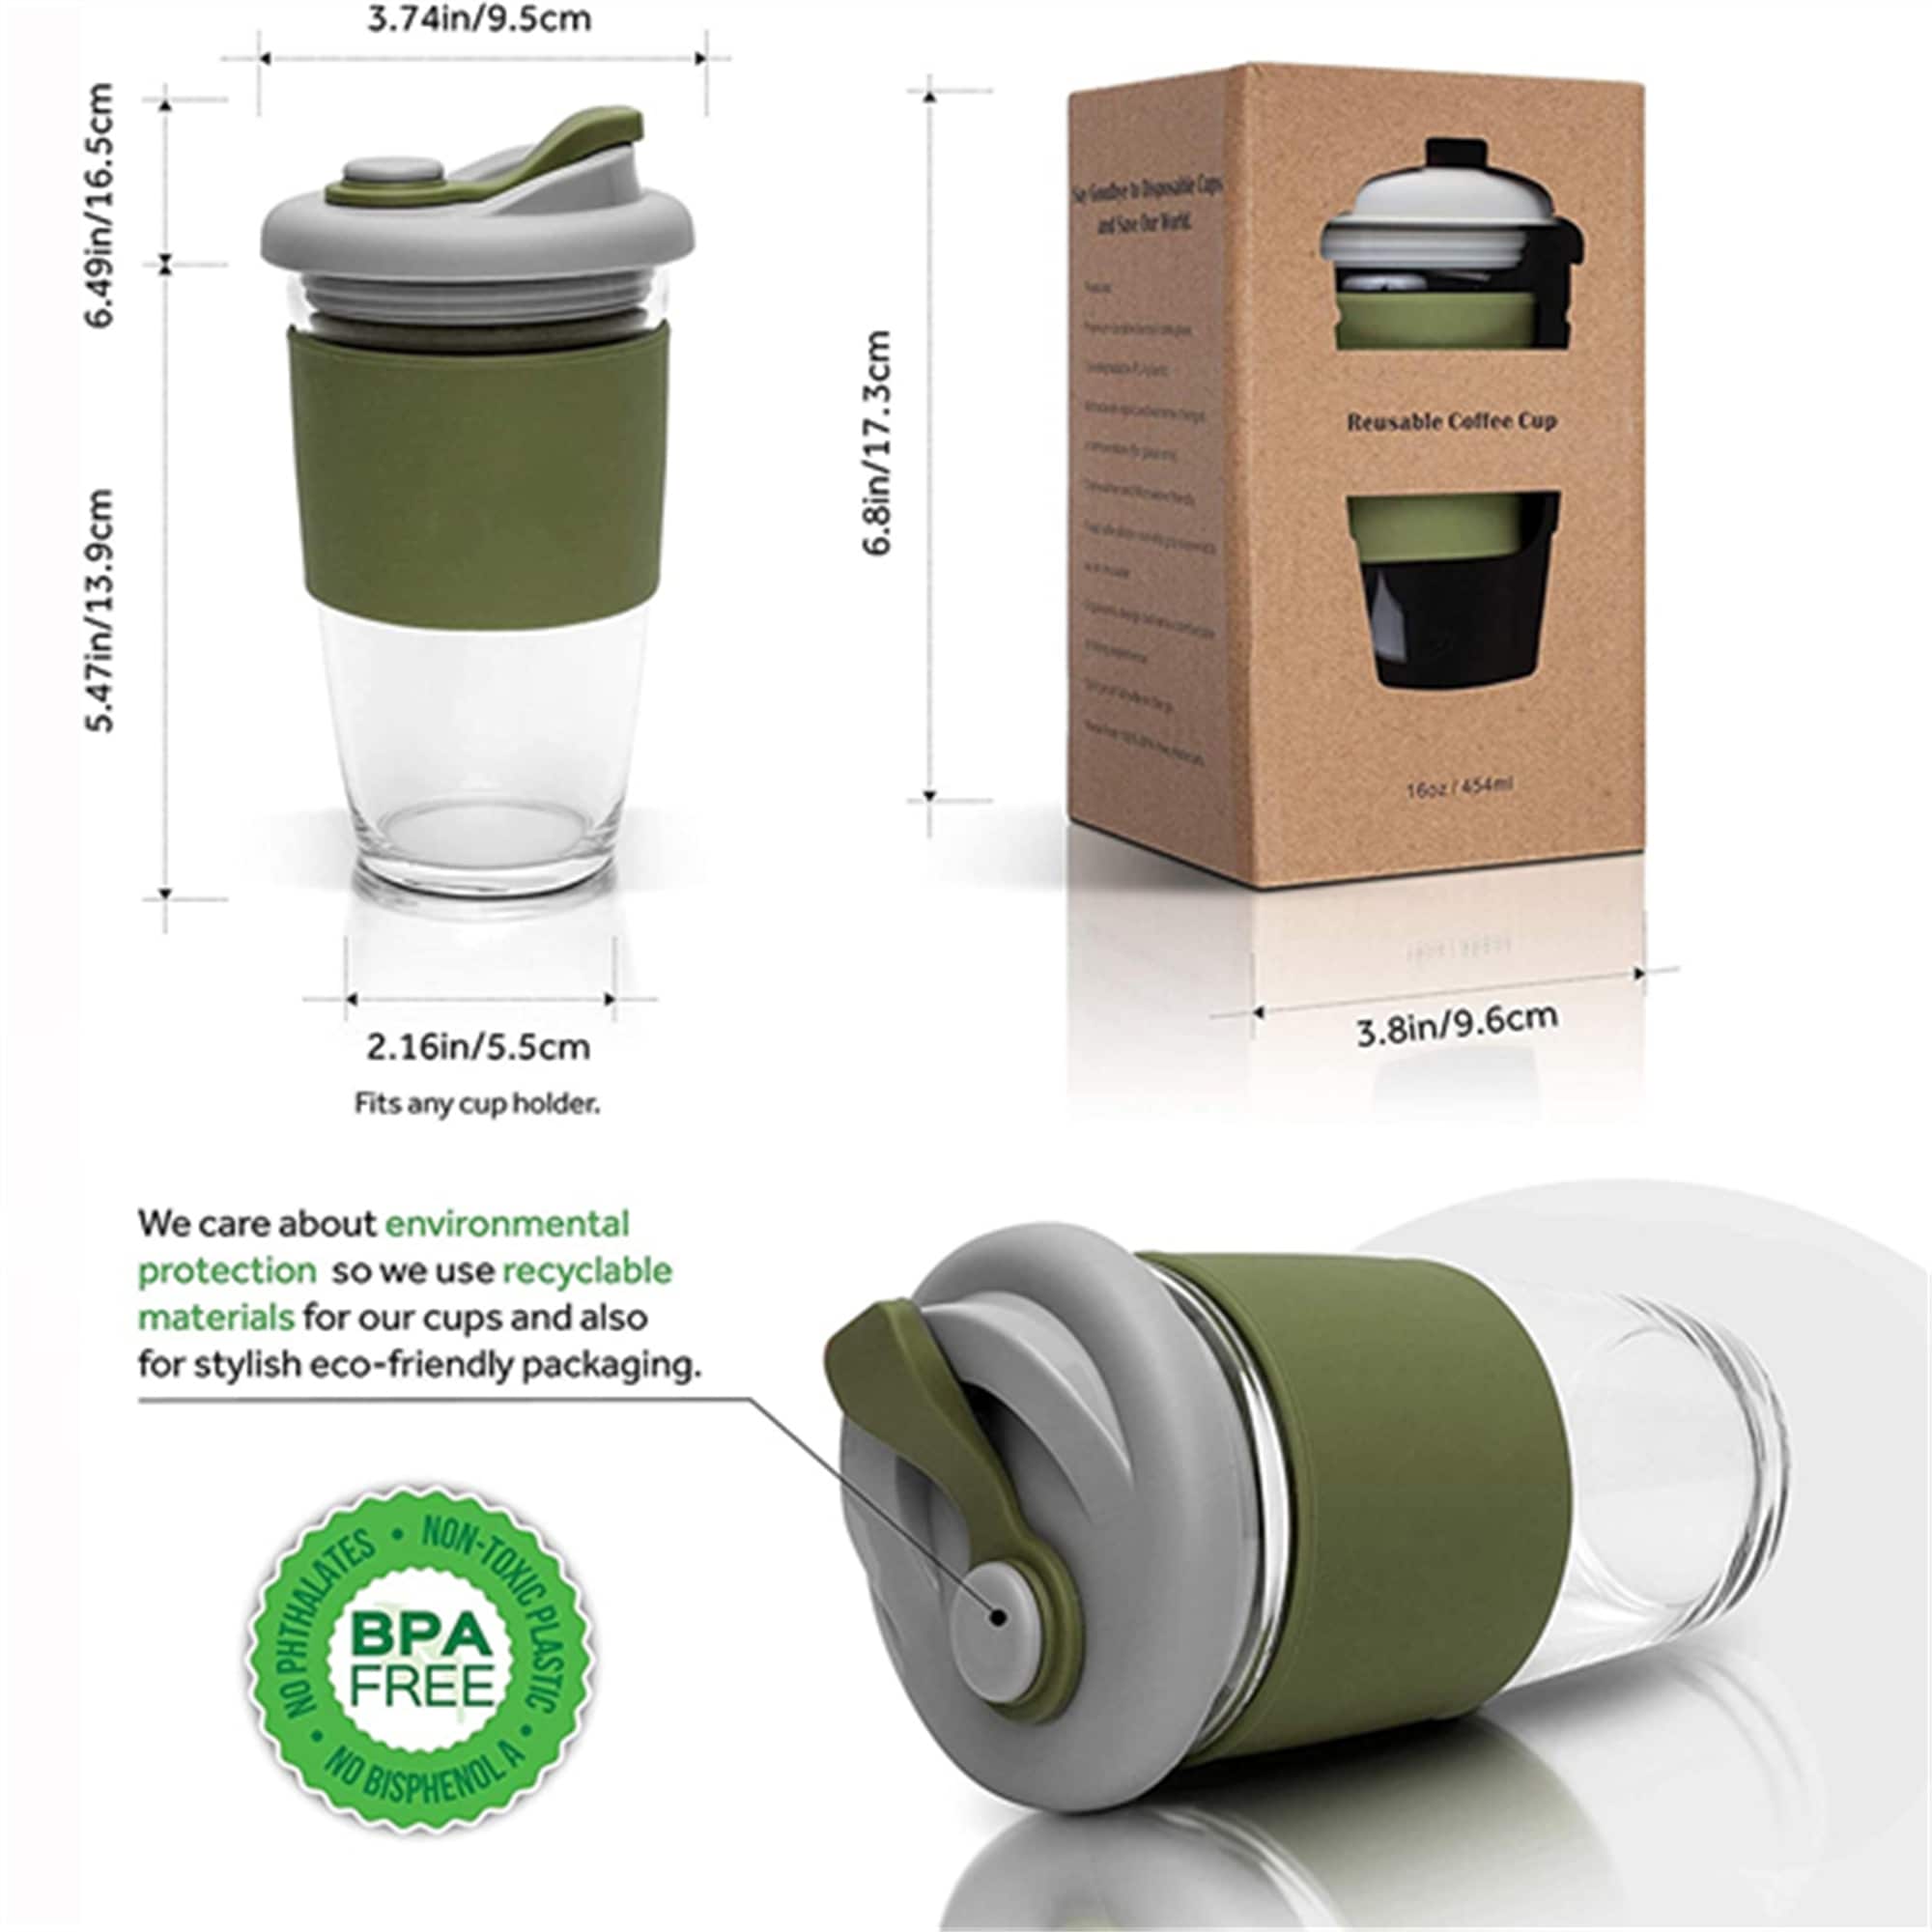 https://ak1.ostkcdn.com/images/products/is/images/direct/34a30ca7640cd24964ad8984b5d5f8ae3241d868/The-Reusable-Glass-Coffee-Cup%2C-ToGo-Travel-Coffee-Mug-with-Lid-and-Silicone-Sleeve%2C-Dishwasher-and-Microwave-Safe.jpg